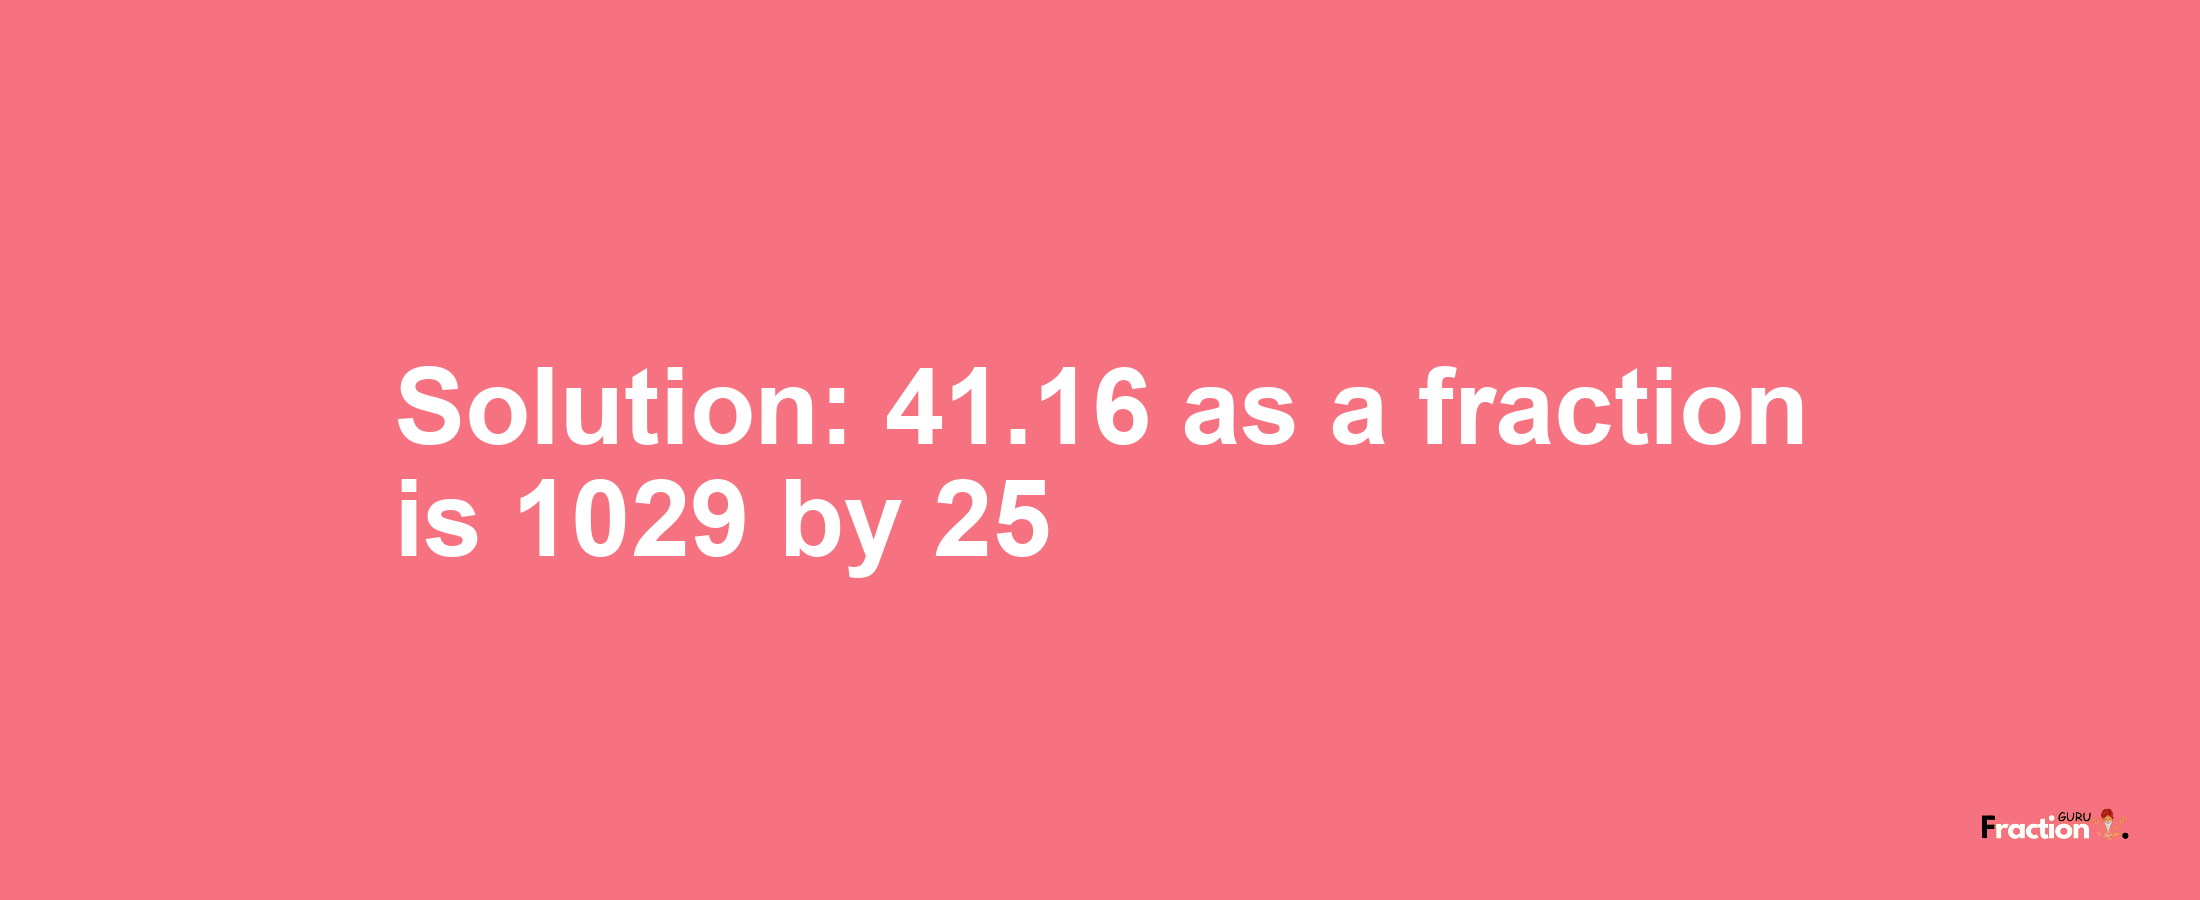 Solution:41.16 as a fraction is 1029/25